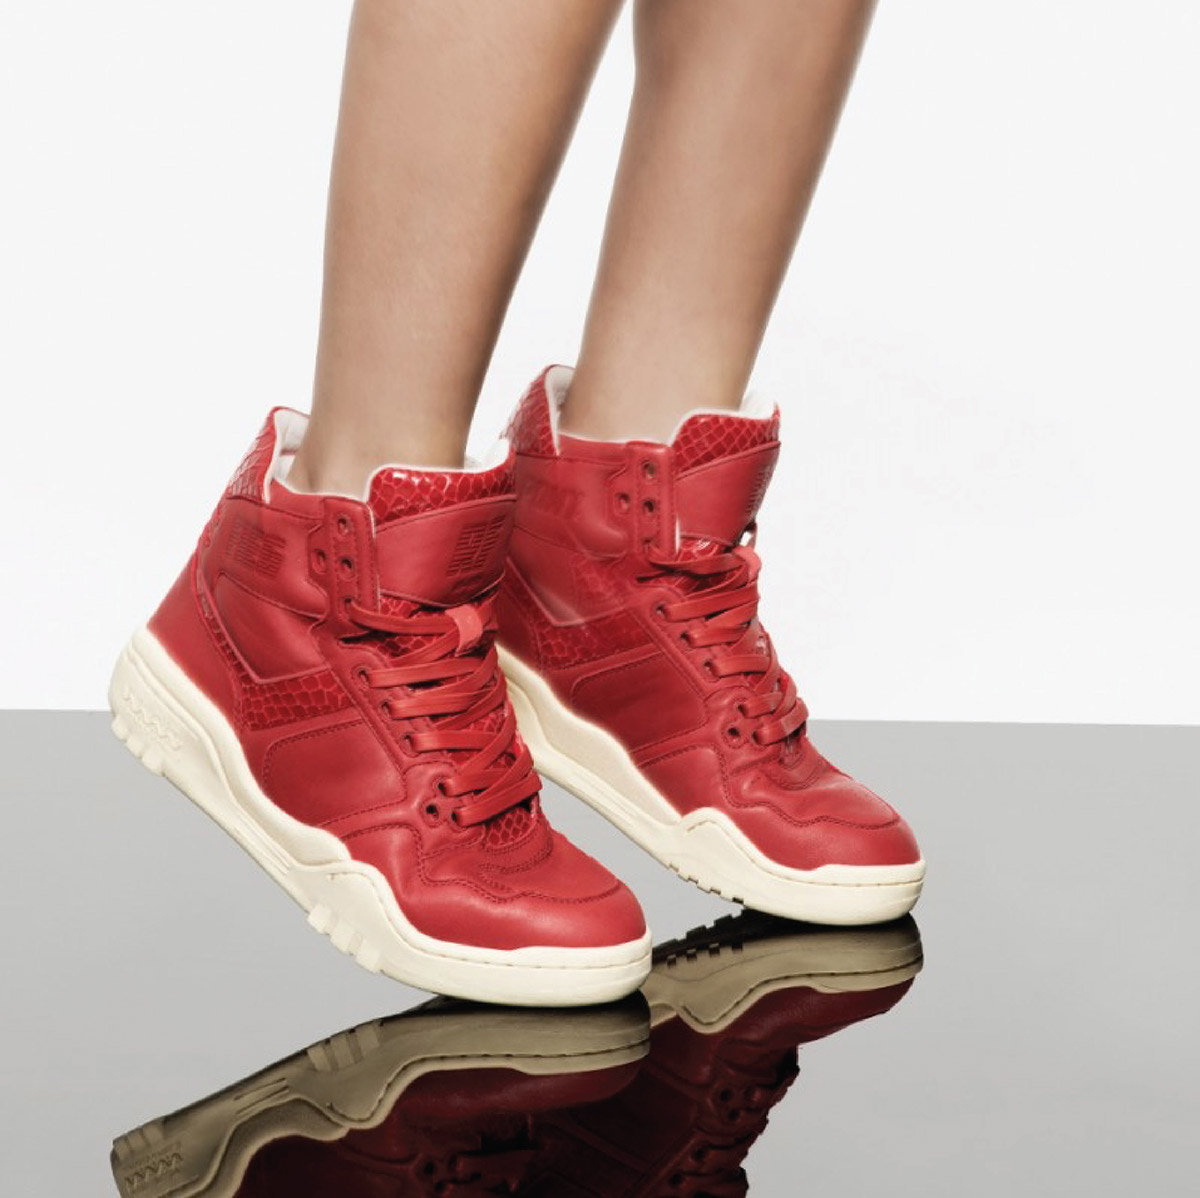 pony kith feig sneaker footwear Collaboration